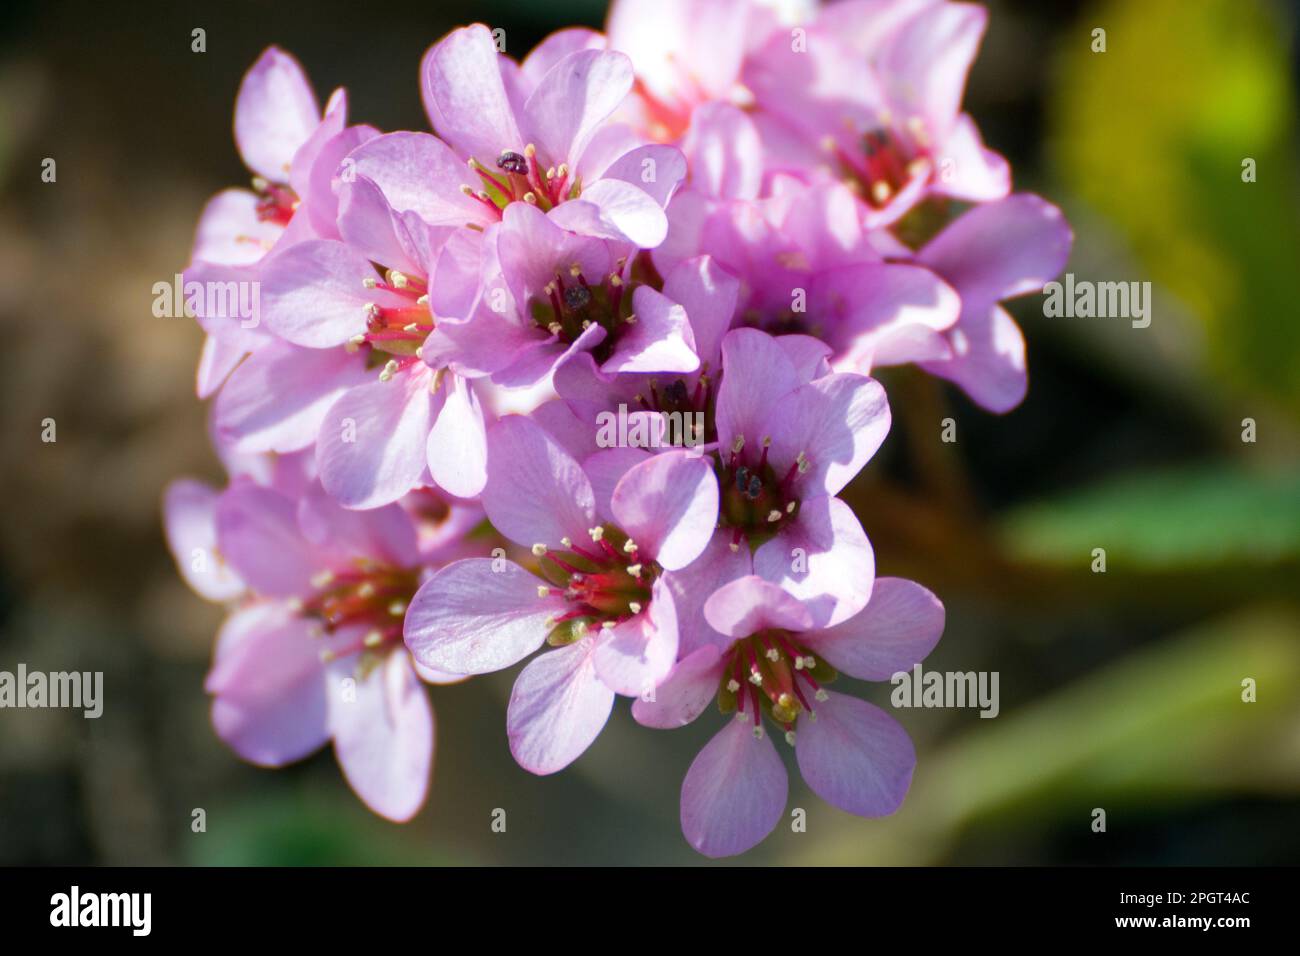 Bergenia cordifolia, elephant's ears, large rockfoil an evergreen  flowering plant with a spirally arranged rosette of leaves and pink little flowers. Stock Photo